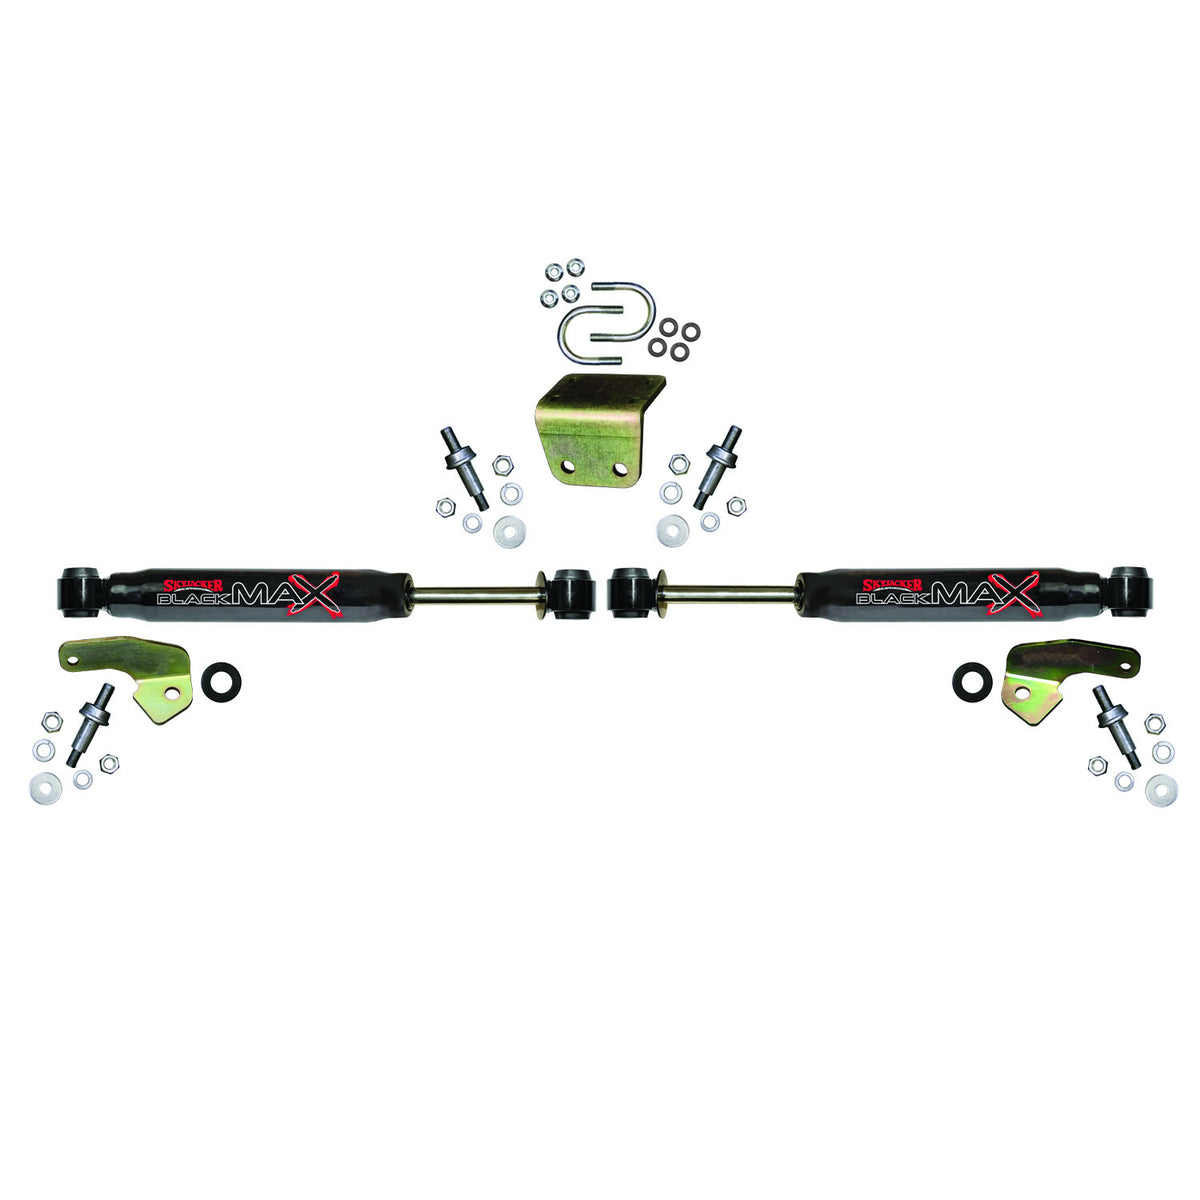 Steering Stabilizer Single Kit Black Single Kit Incl. 2 Steering Stabilizers Mounting Brackets Hardware Designed For A Minimum Of 4 Inch Lift Boots Sold Separately Skyjacker